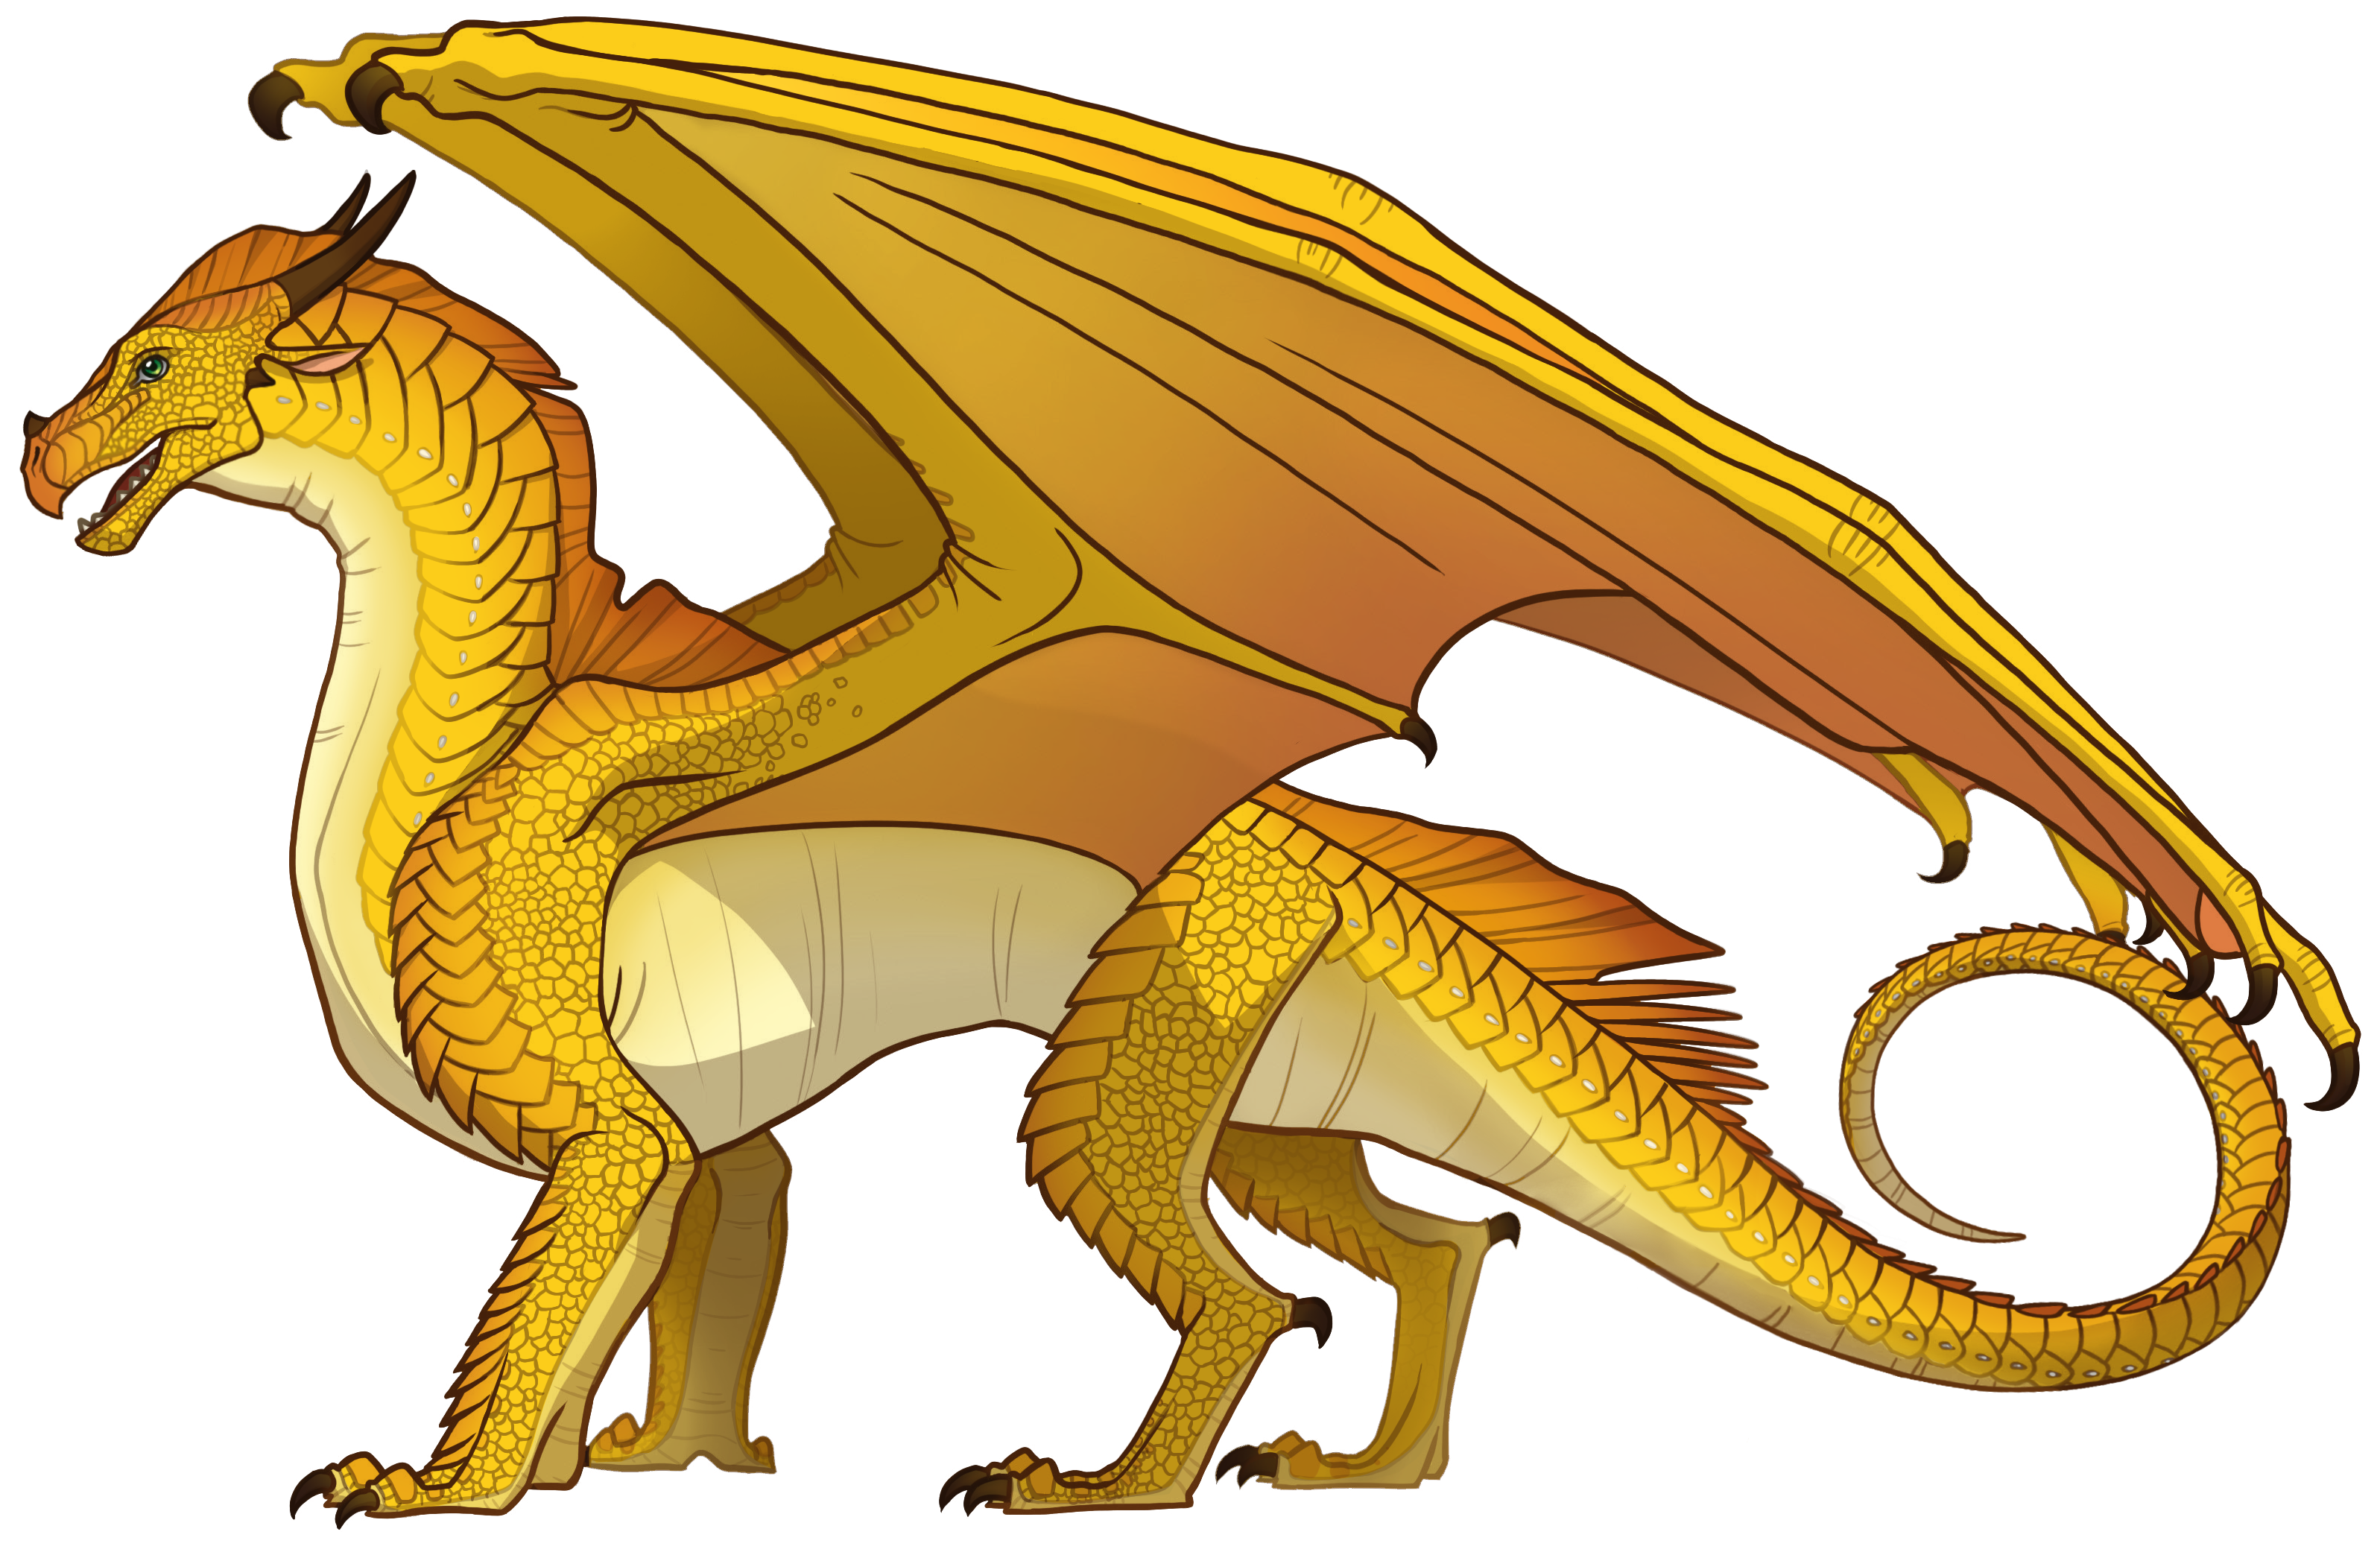 what type of wings of fire dragon am i